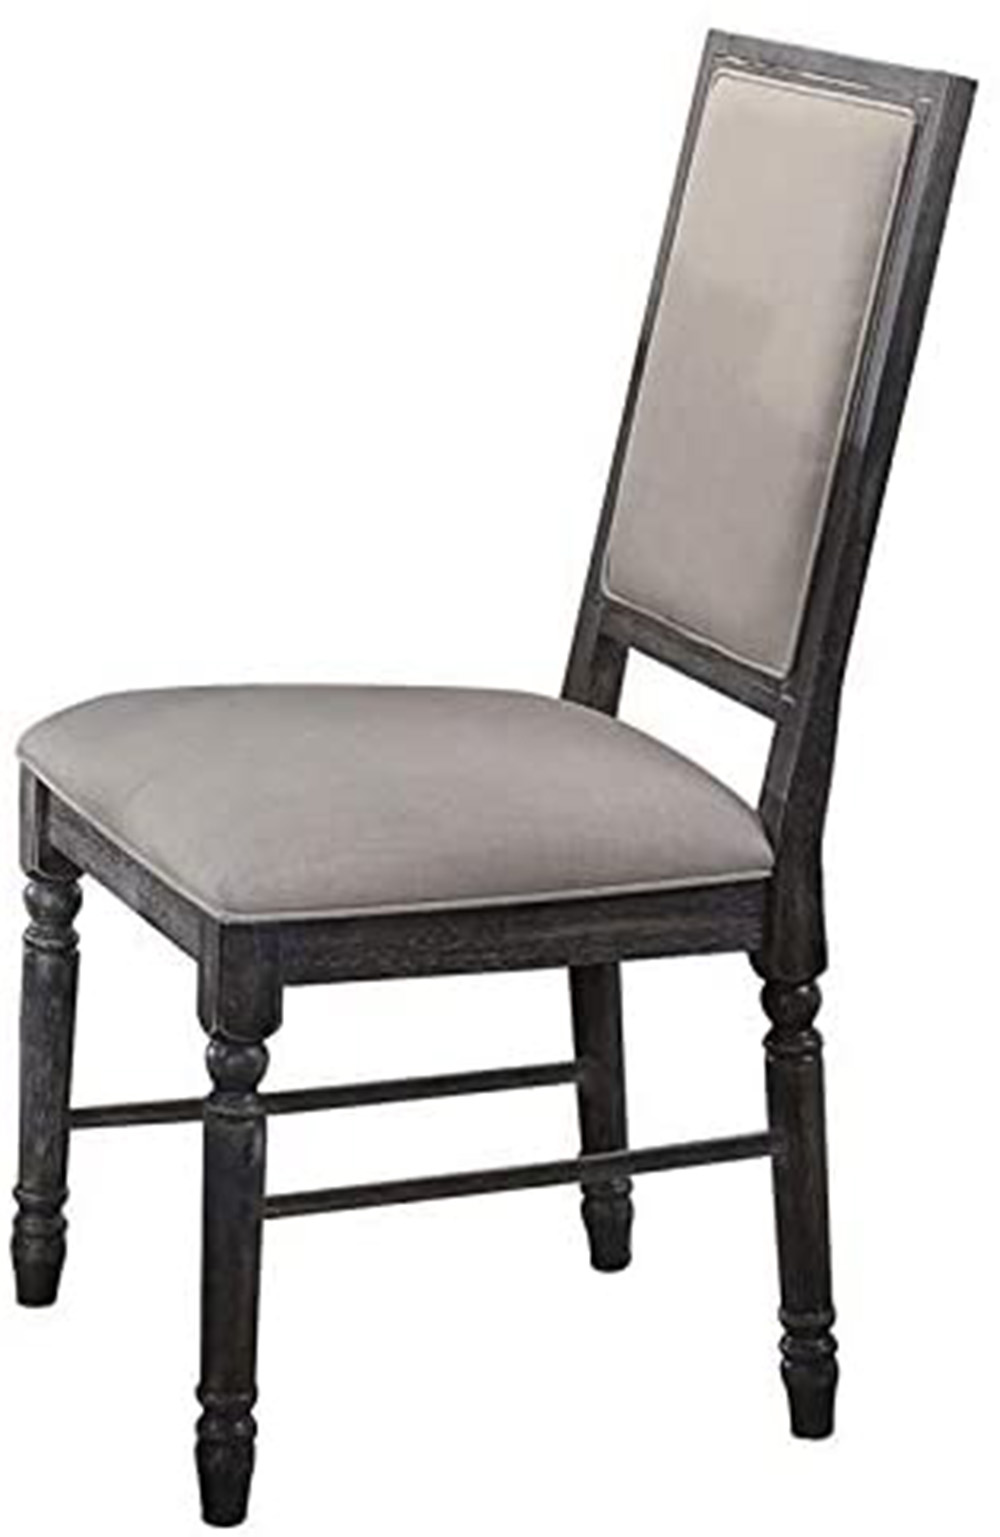 ACME Leventis Linen Upholstered Dining Chair Set of 2, with High  Backrest, and Wood Legs, for Restaurant, Cafe, Tavern, Office, Living Room - Cream